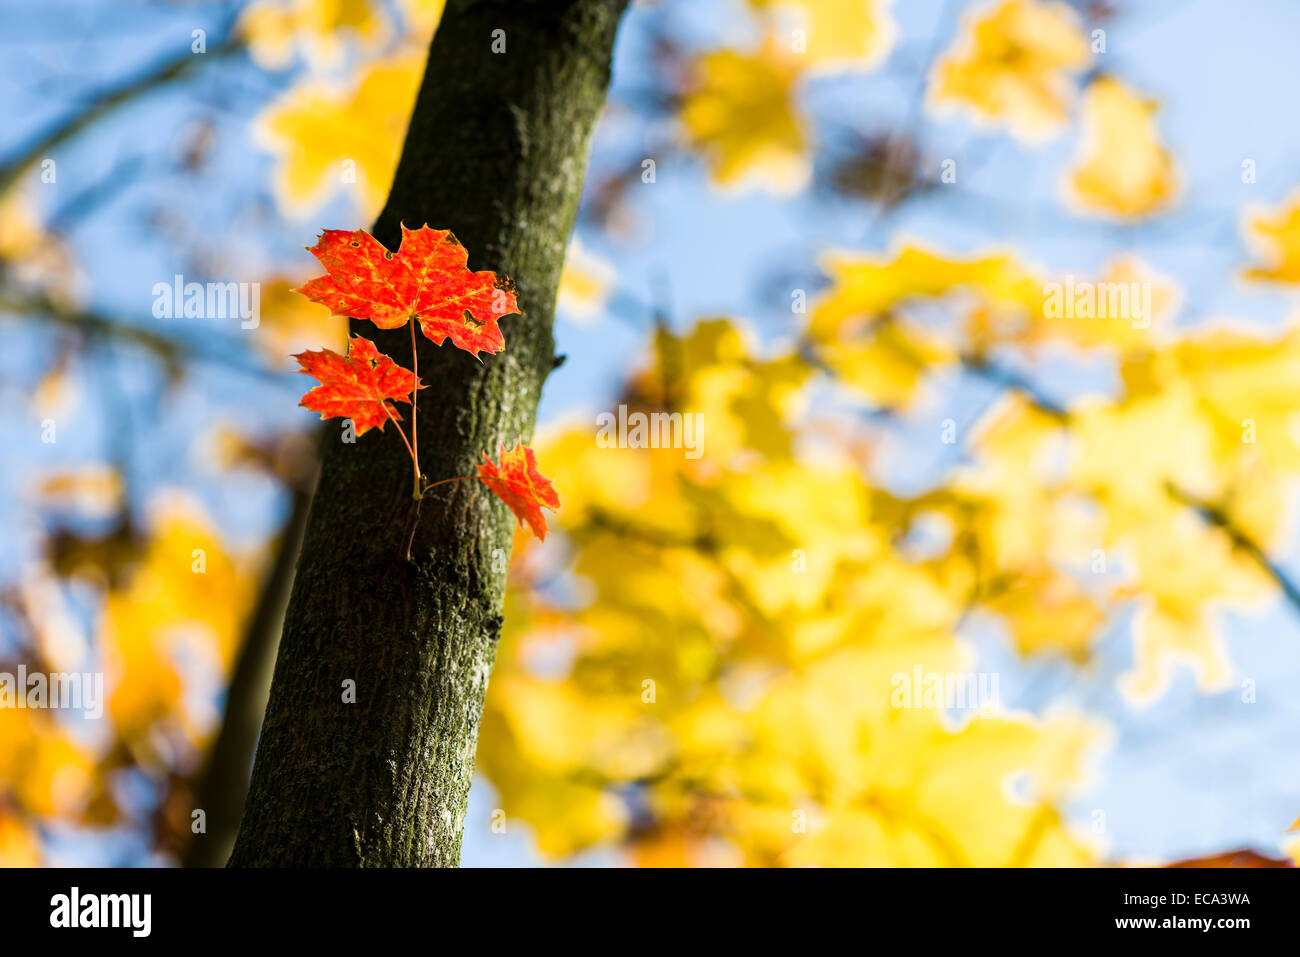 Red, orange and yellow leaves of a maple tree in autumn, Würzburg, Bavaria, Germany Stock Photo